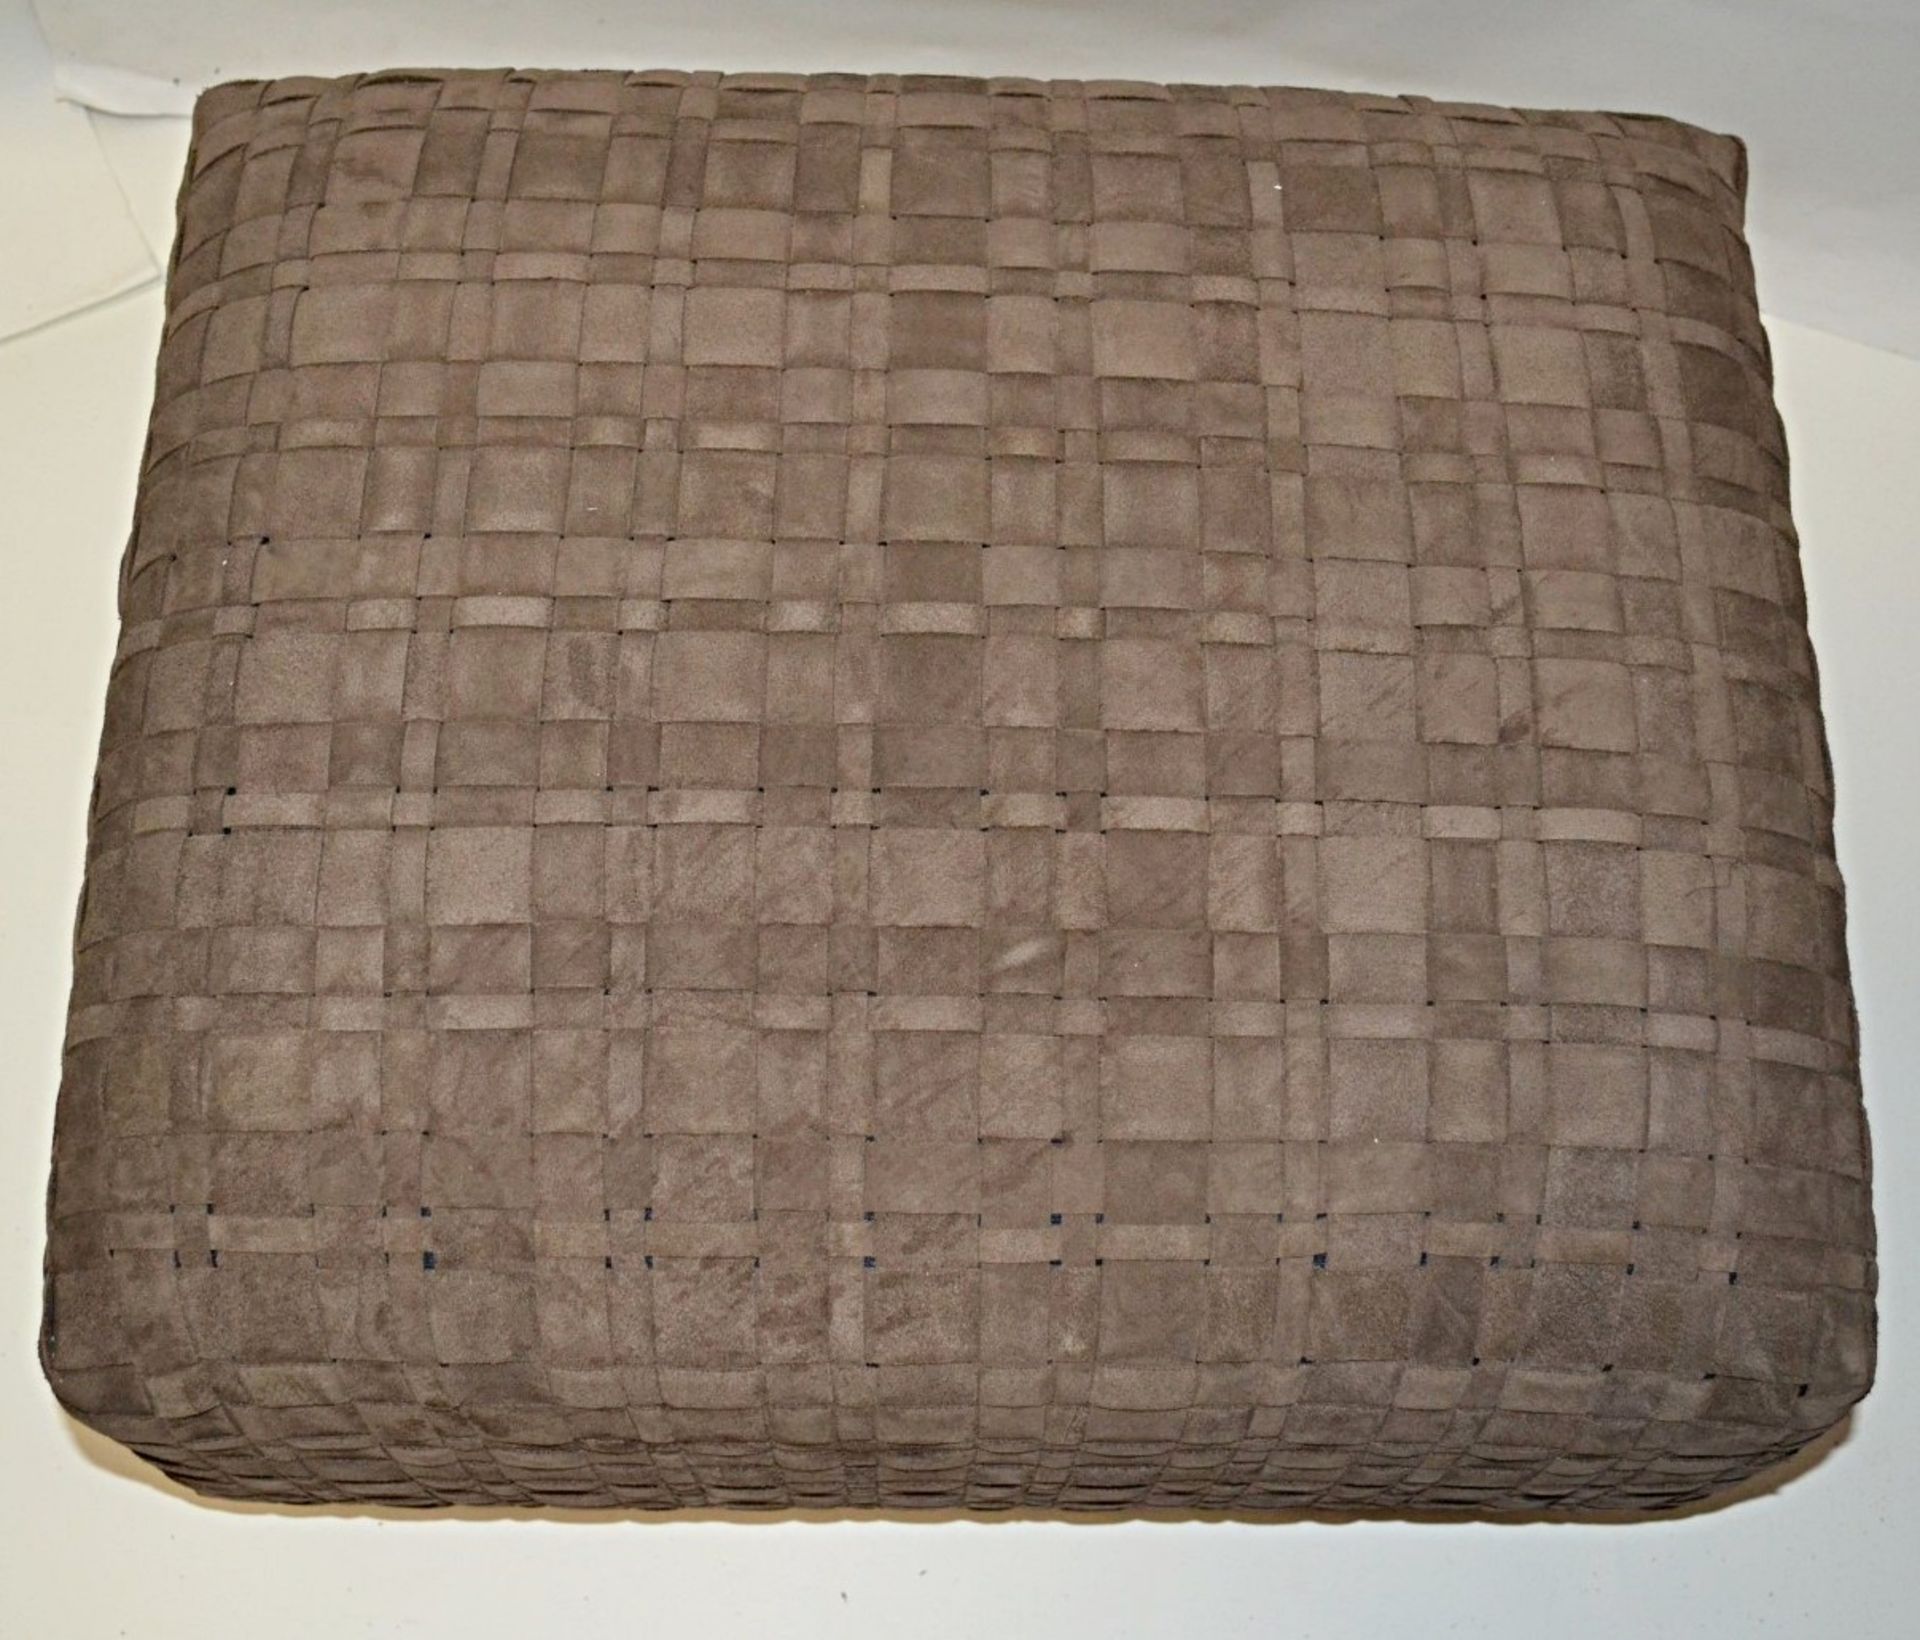 1 x Flexform Bangkok Ottoman - Elegantly Upholstered In Woven Strips of Brown Suede Leather - - Image 4 of 4